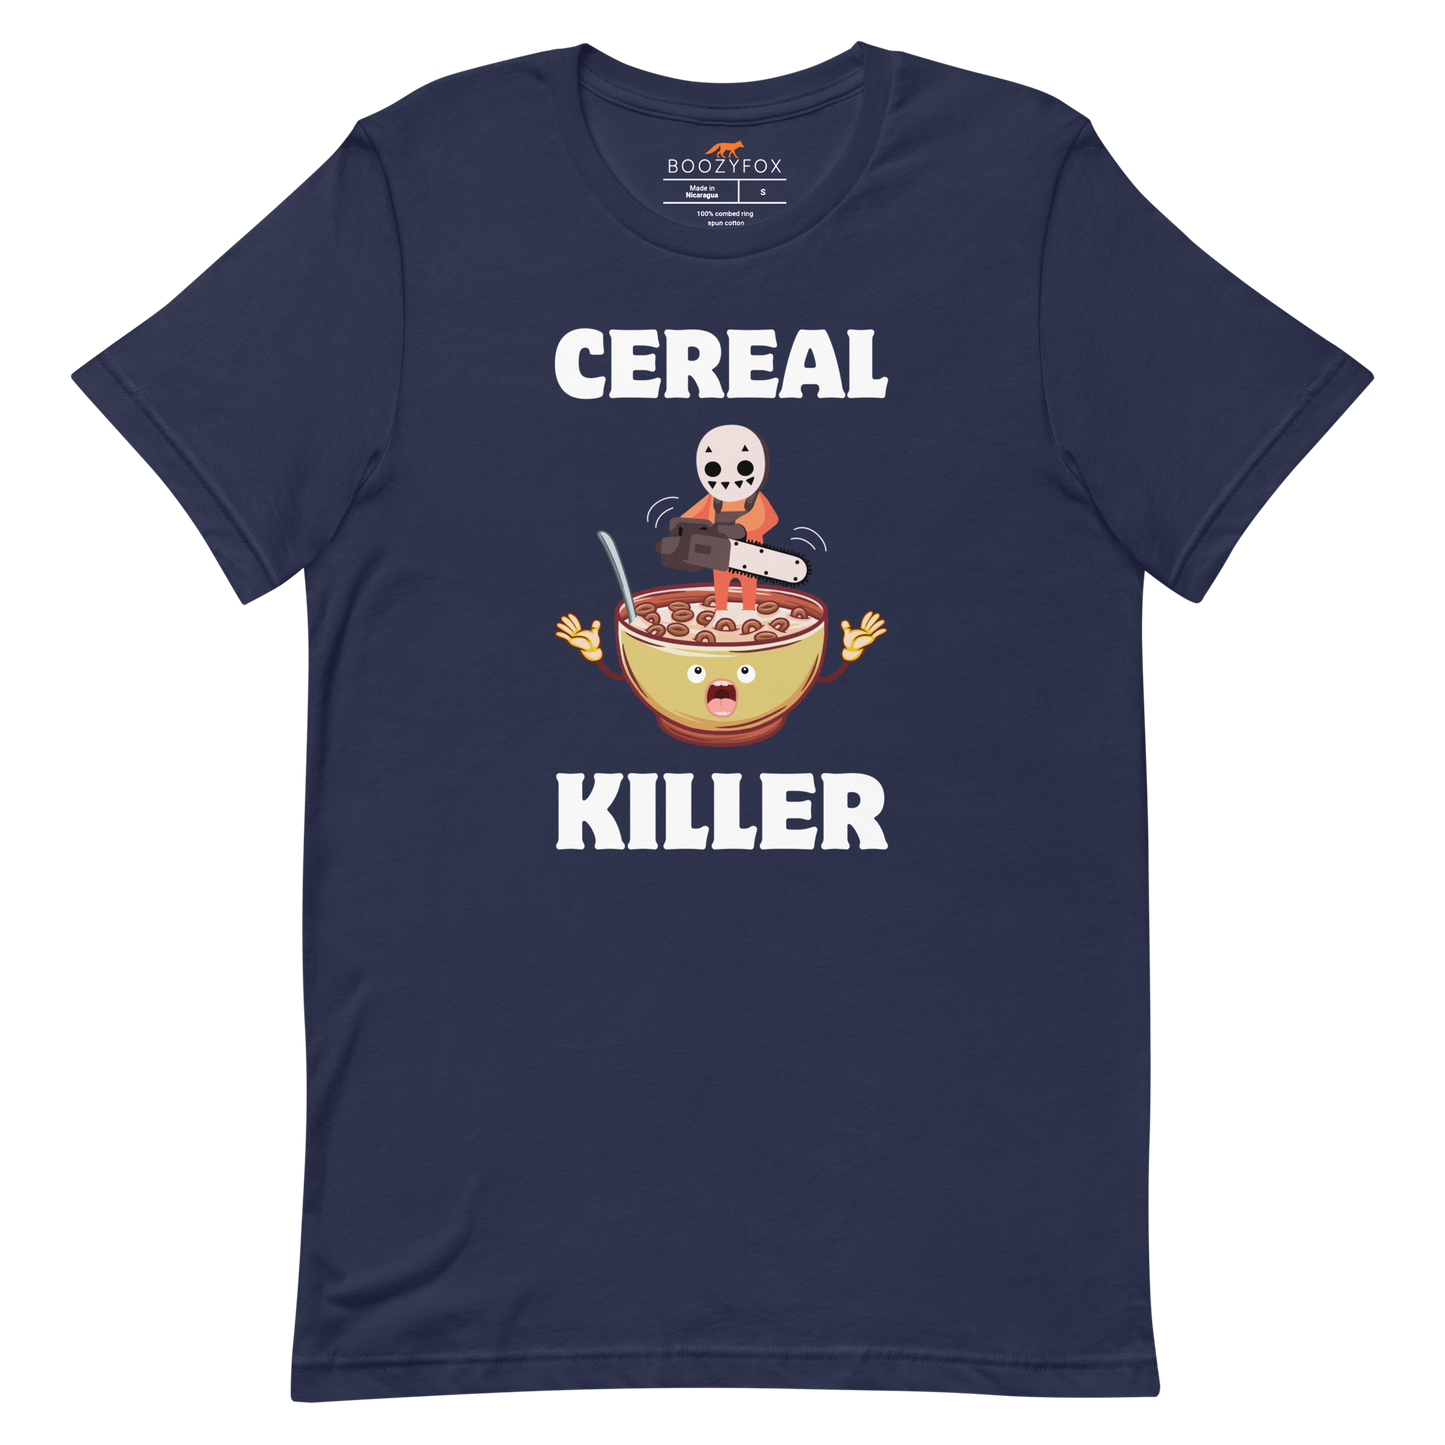 Navy Premium Cereal Killer Tee featuring a Cereal Killer graphic on the chest - Funny Graphic Tees - Boozy Fox